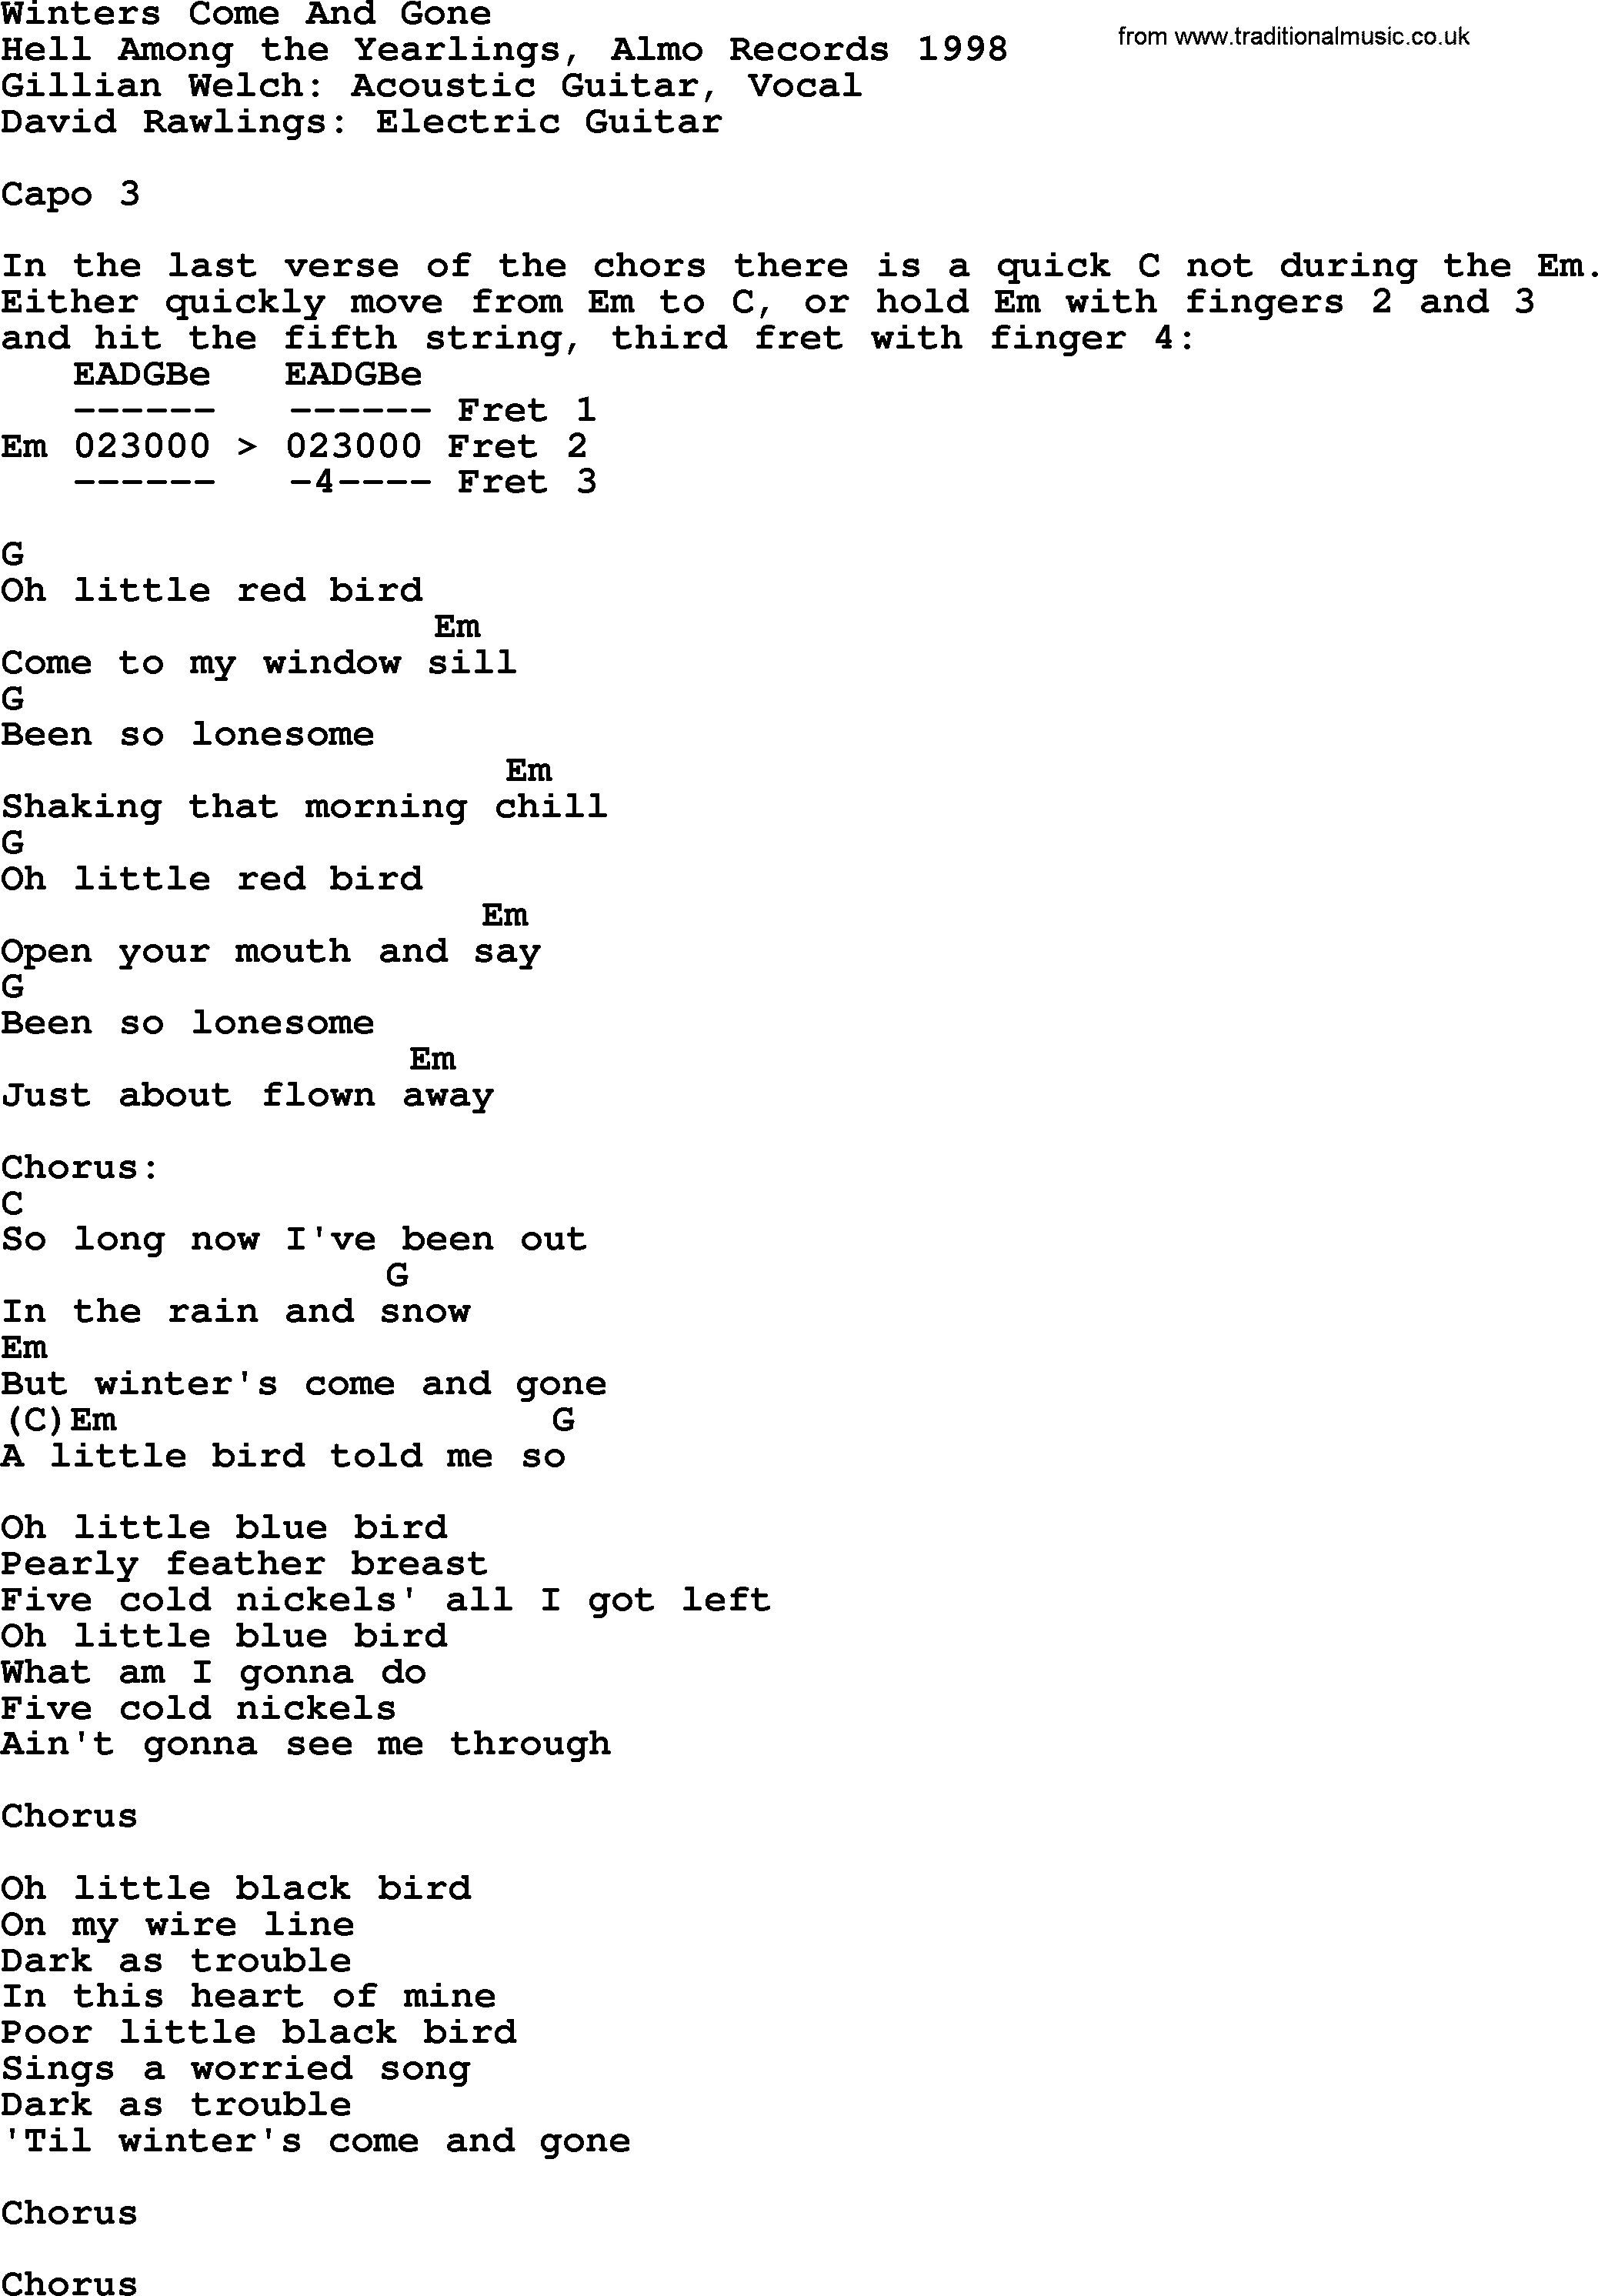 Bluegrass song: Winters Come And Gone, lyrics and chords